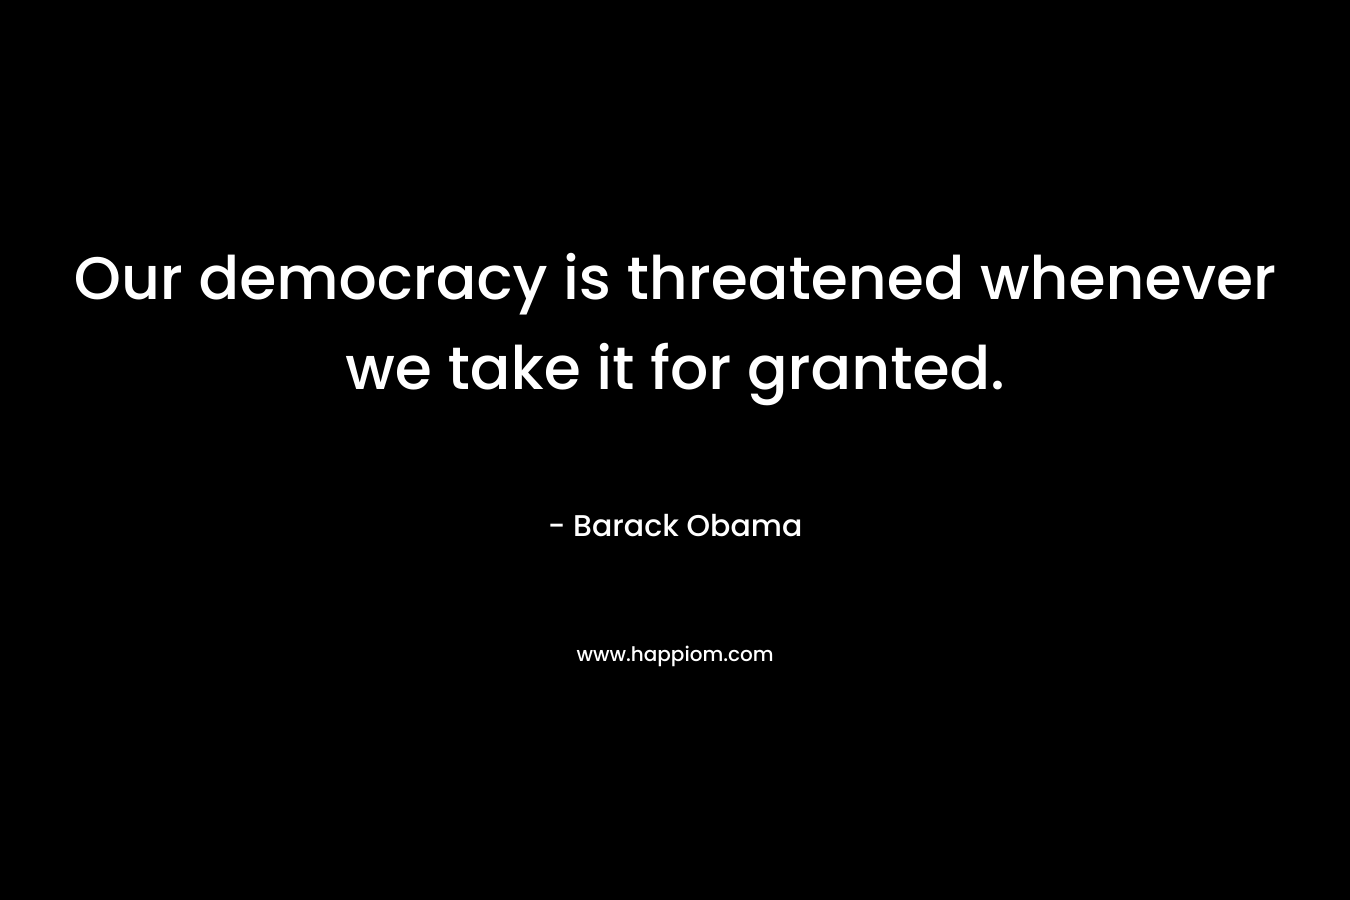 Our democracy is threatened whenever we take it for granted. – Barack Obama